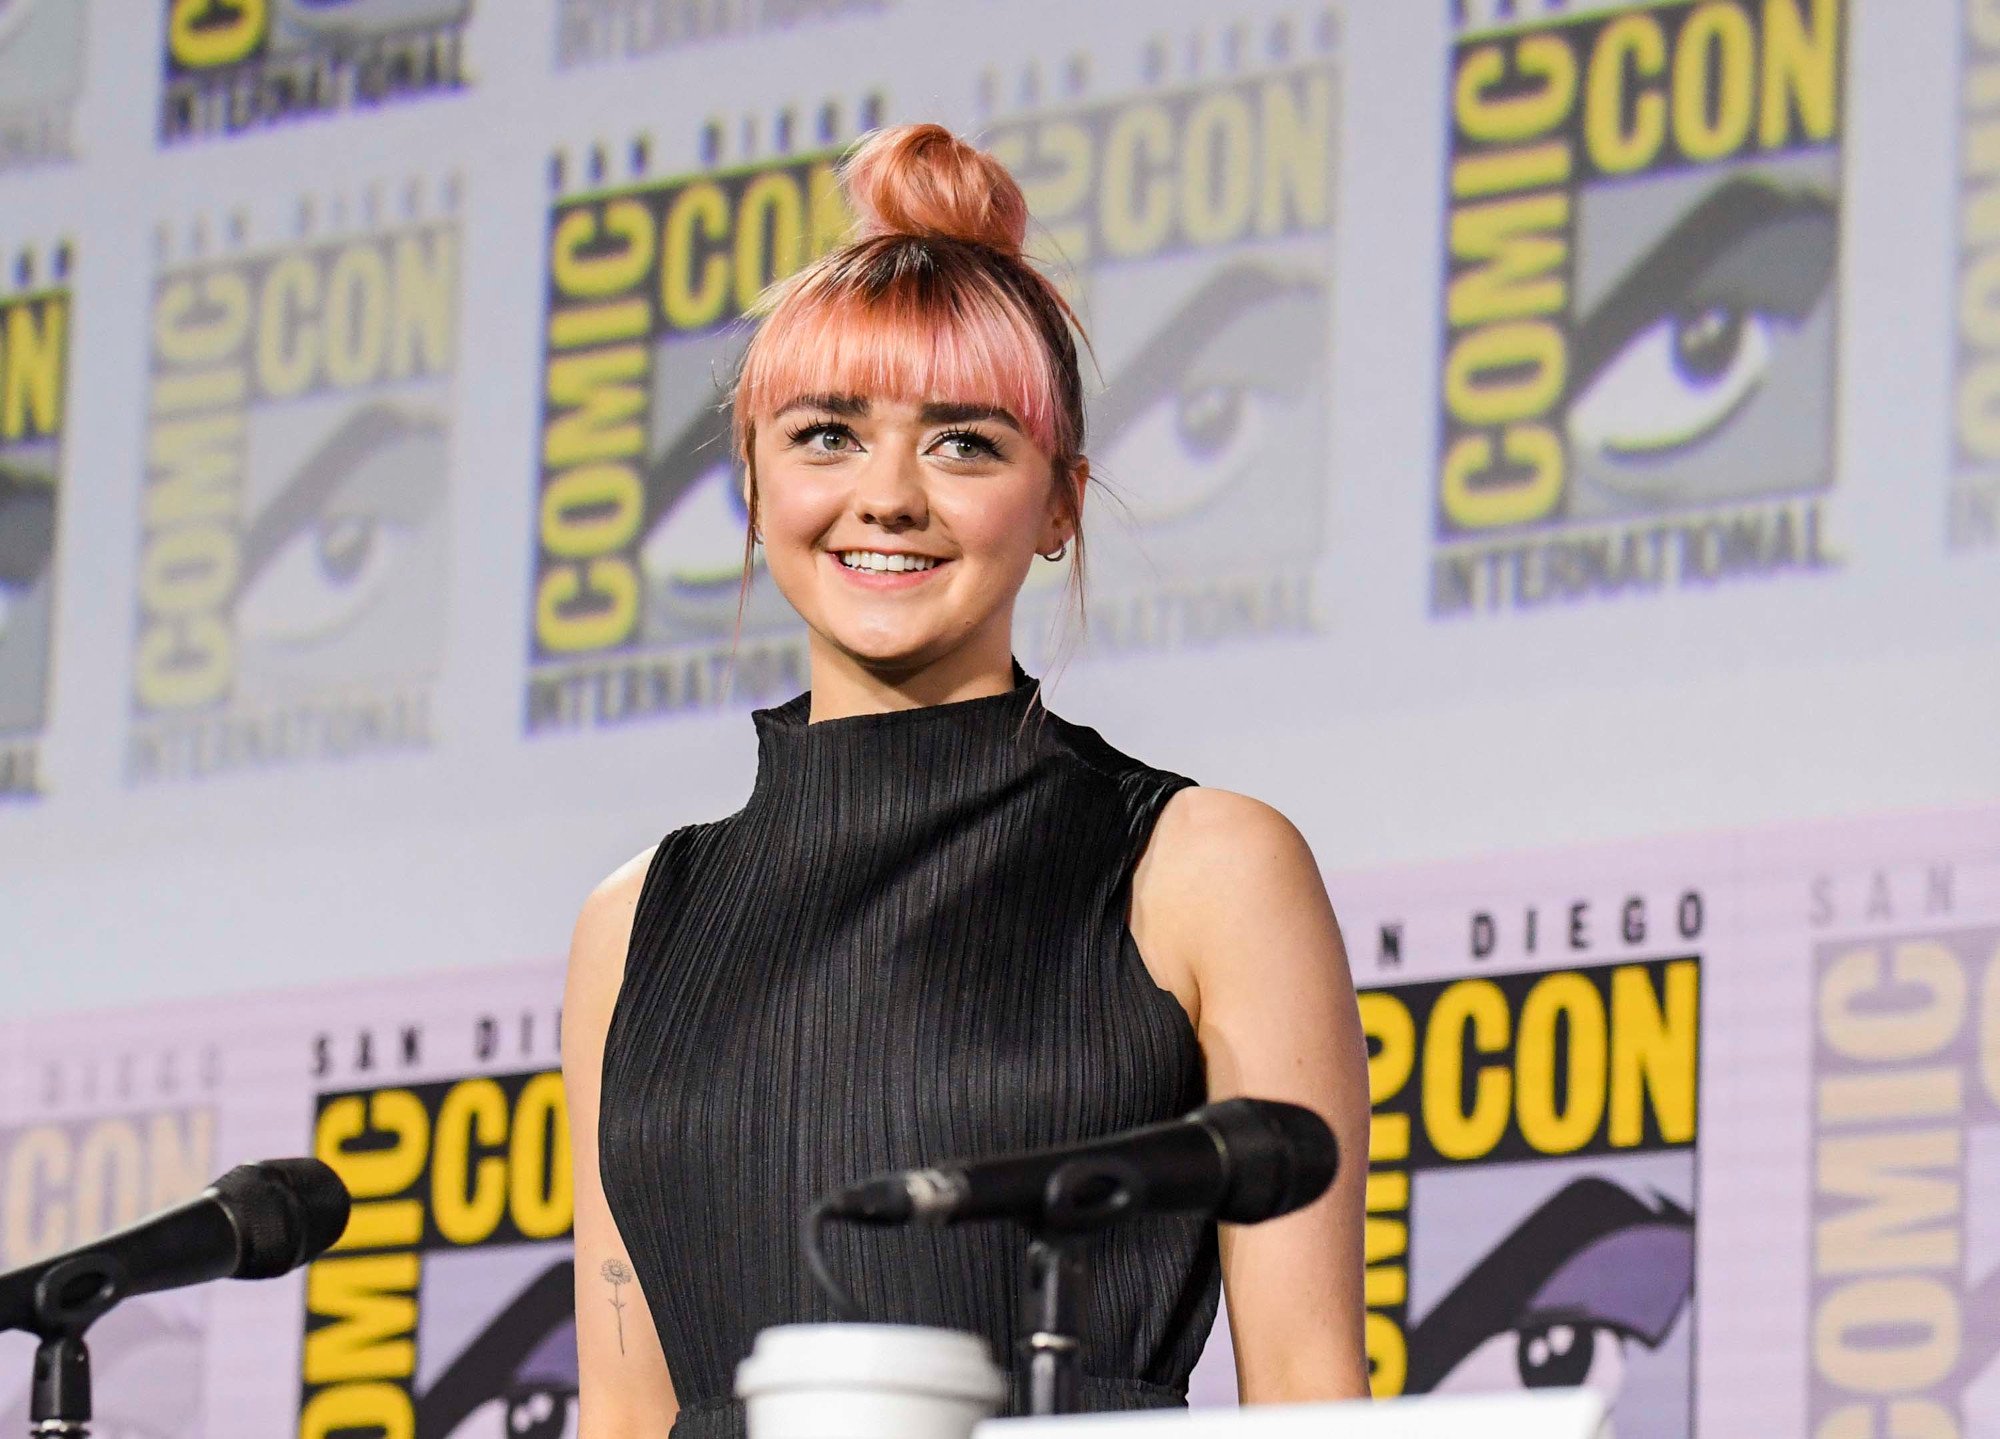 Game of Thrones star Maisie Williams stands in front of a Comic-Con wall with her pink hair in a bun and a black blouse on